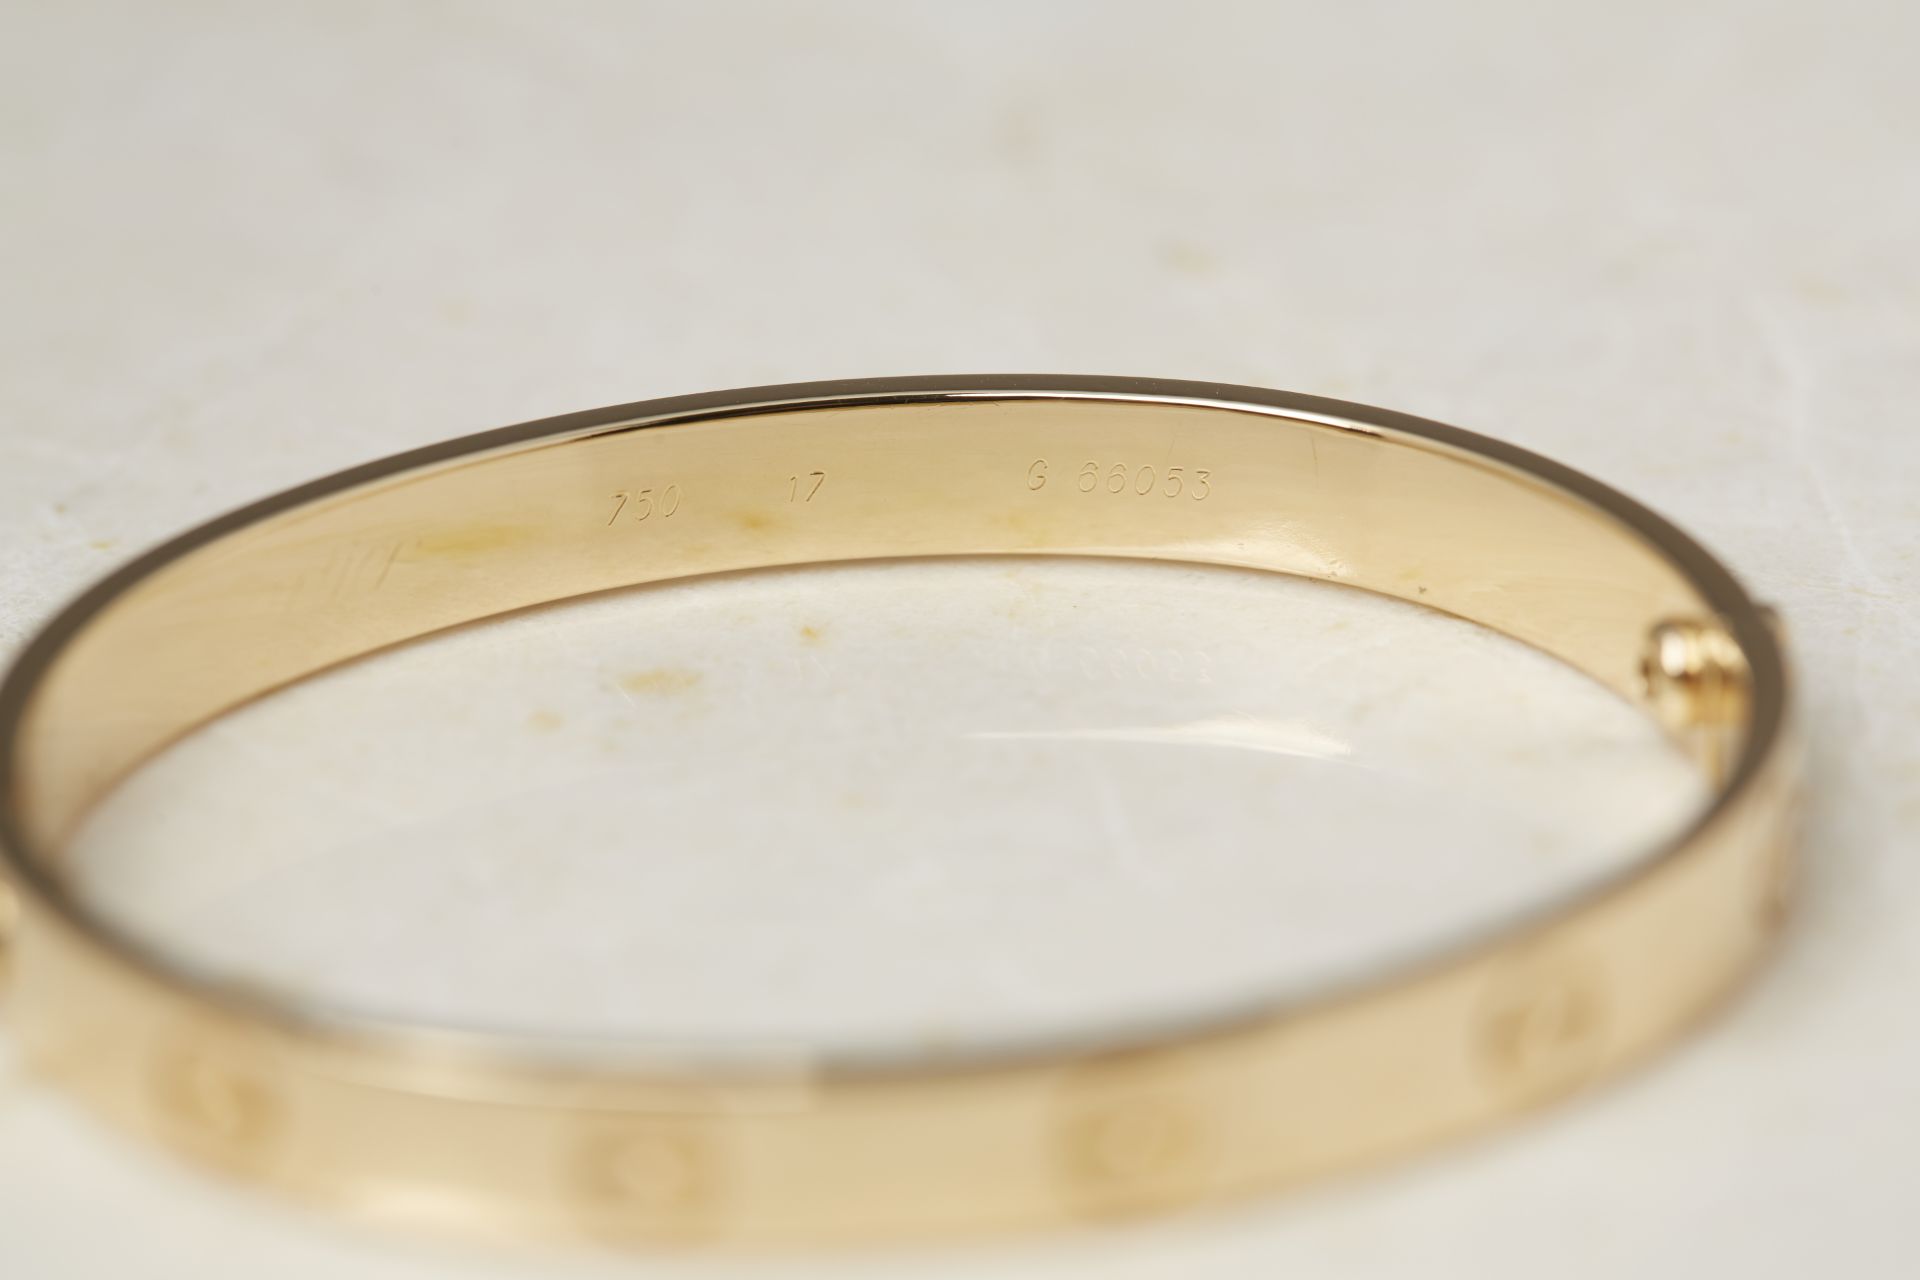 Cartier 18k Yellow Gold Love Bangle - Image 8 of 8